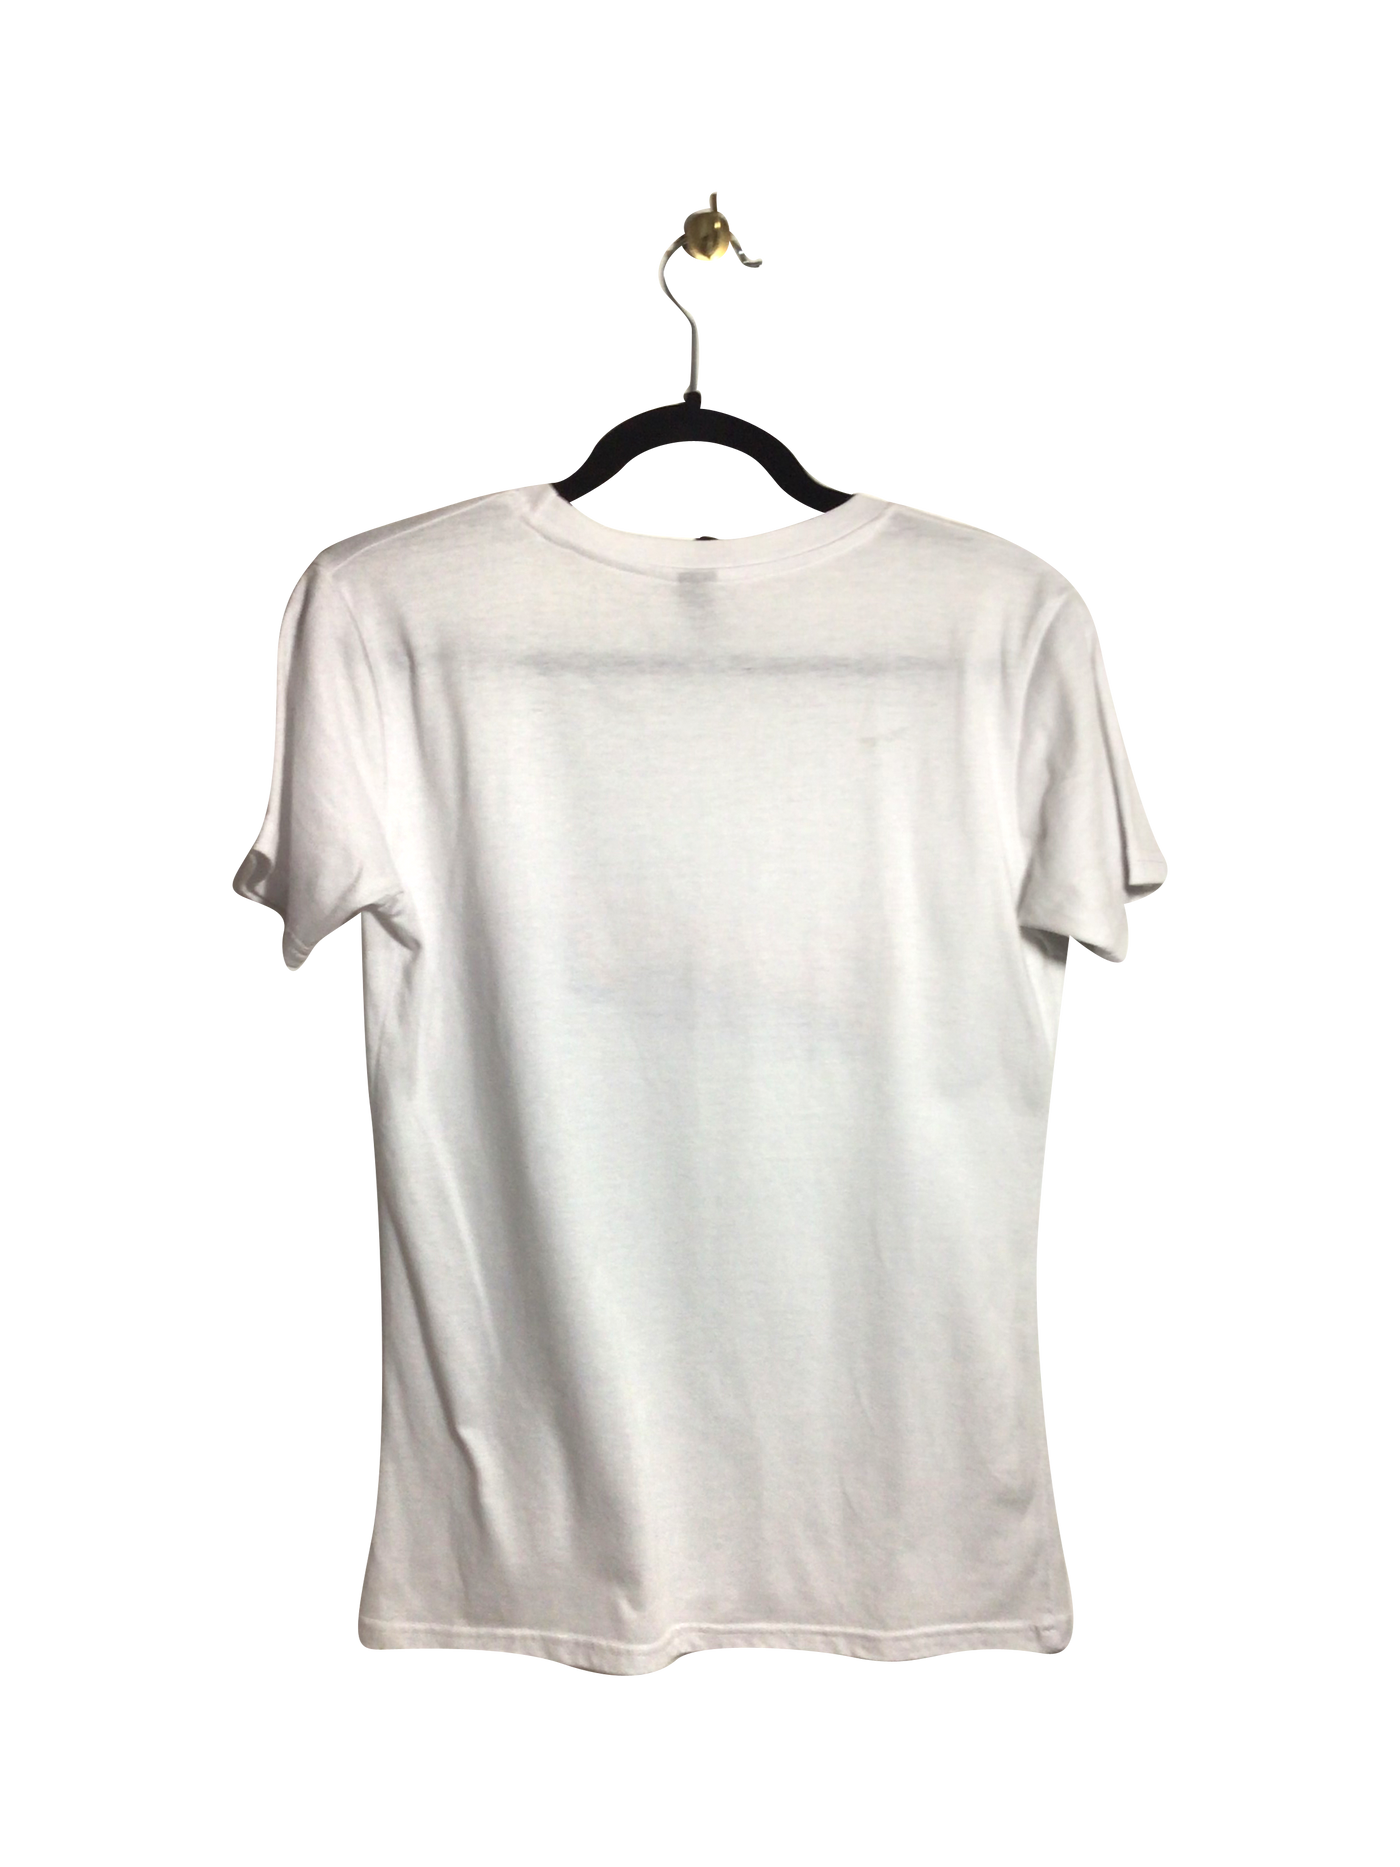 INITIAL ATTRACTION Women T-Shirts Regular fit in White - Size S | 9.34 $ KOOP